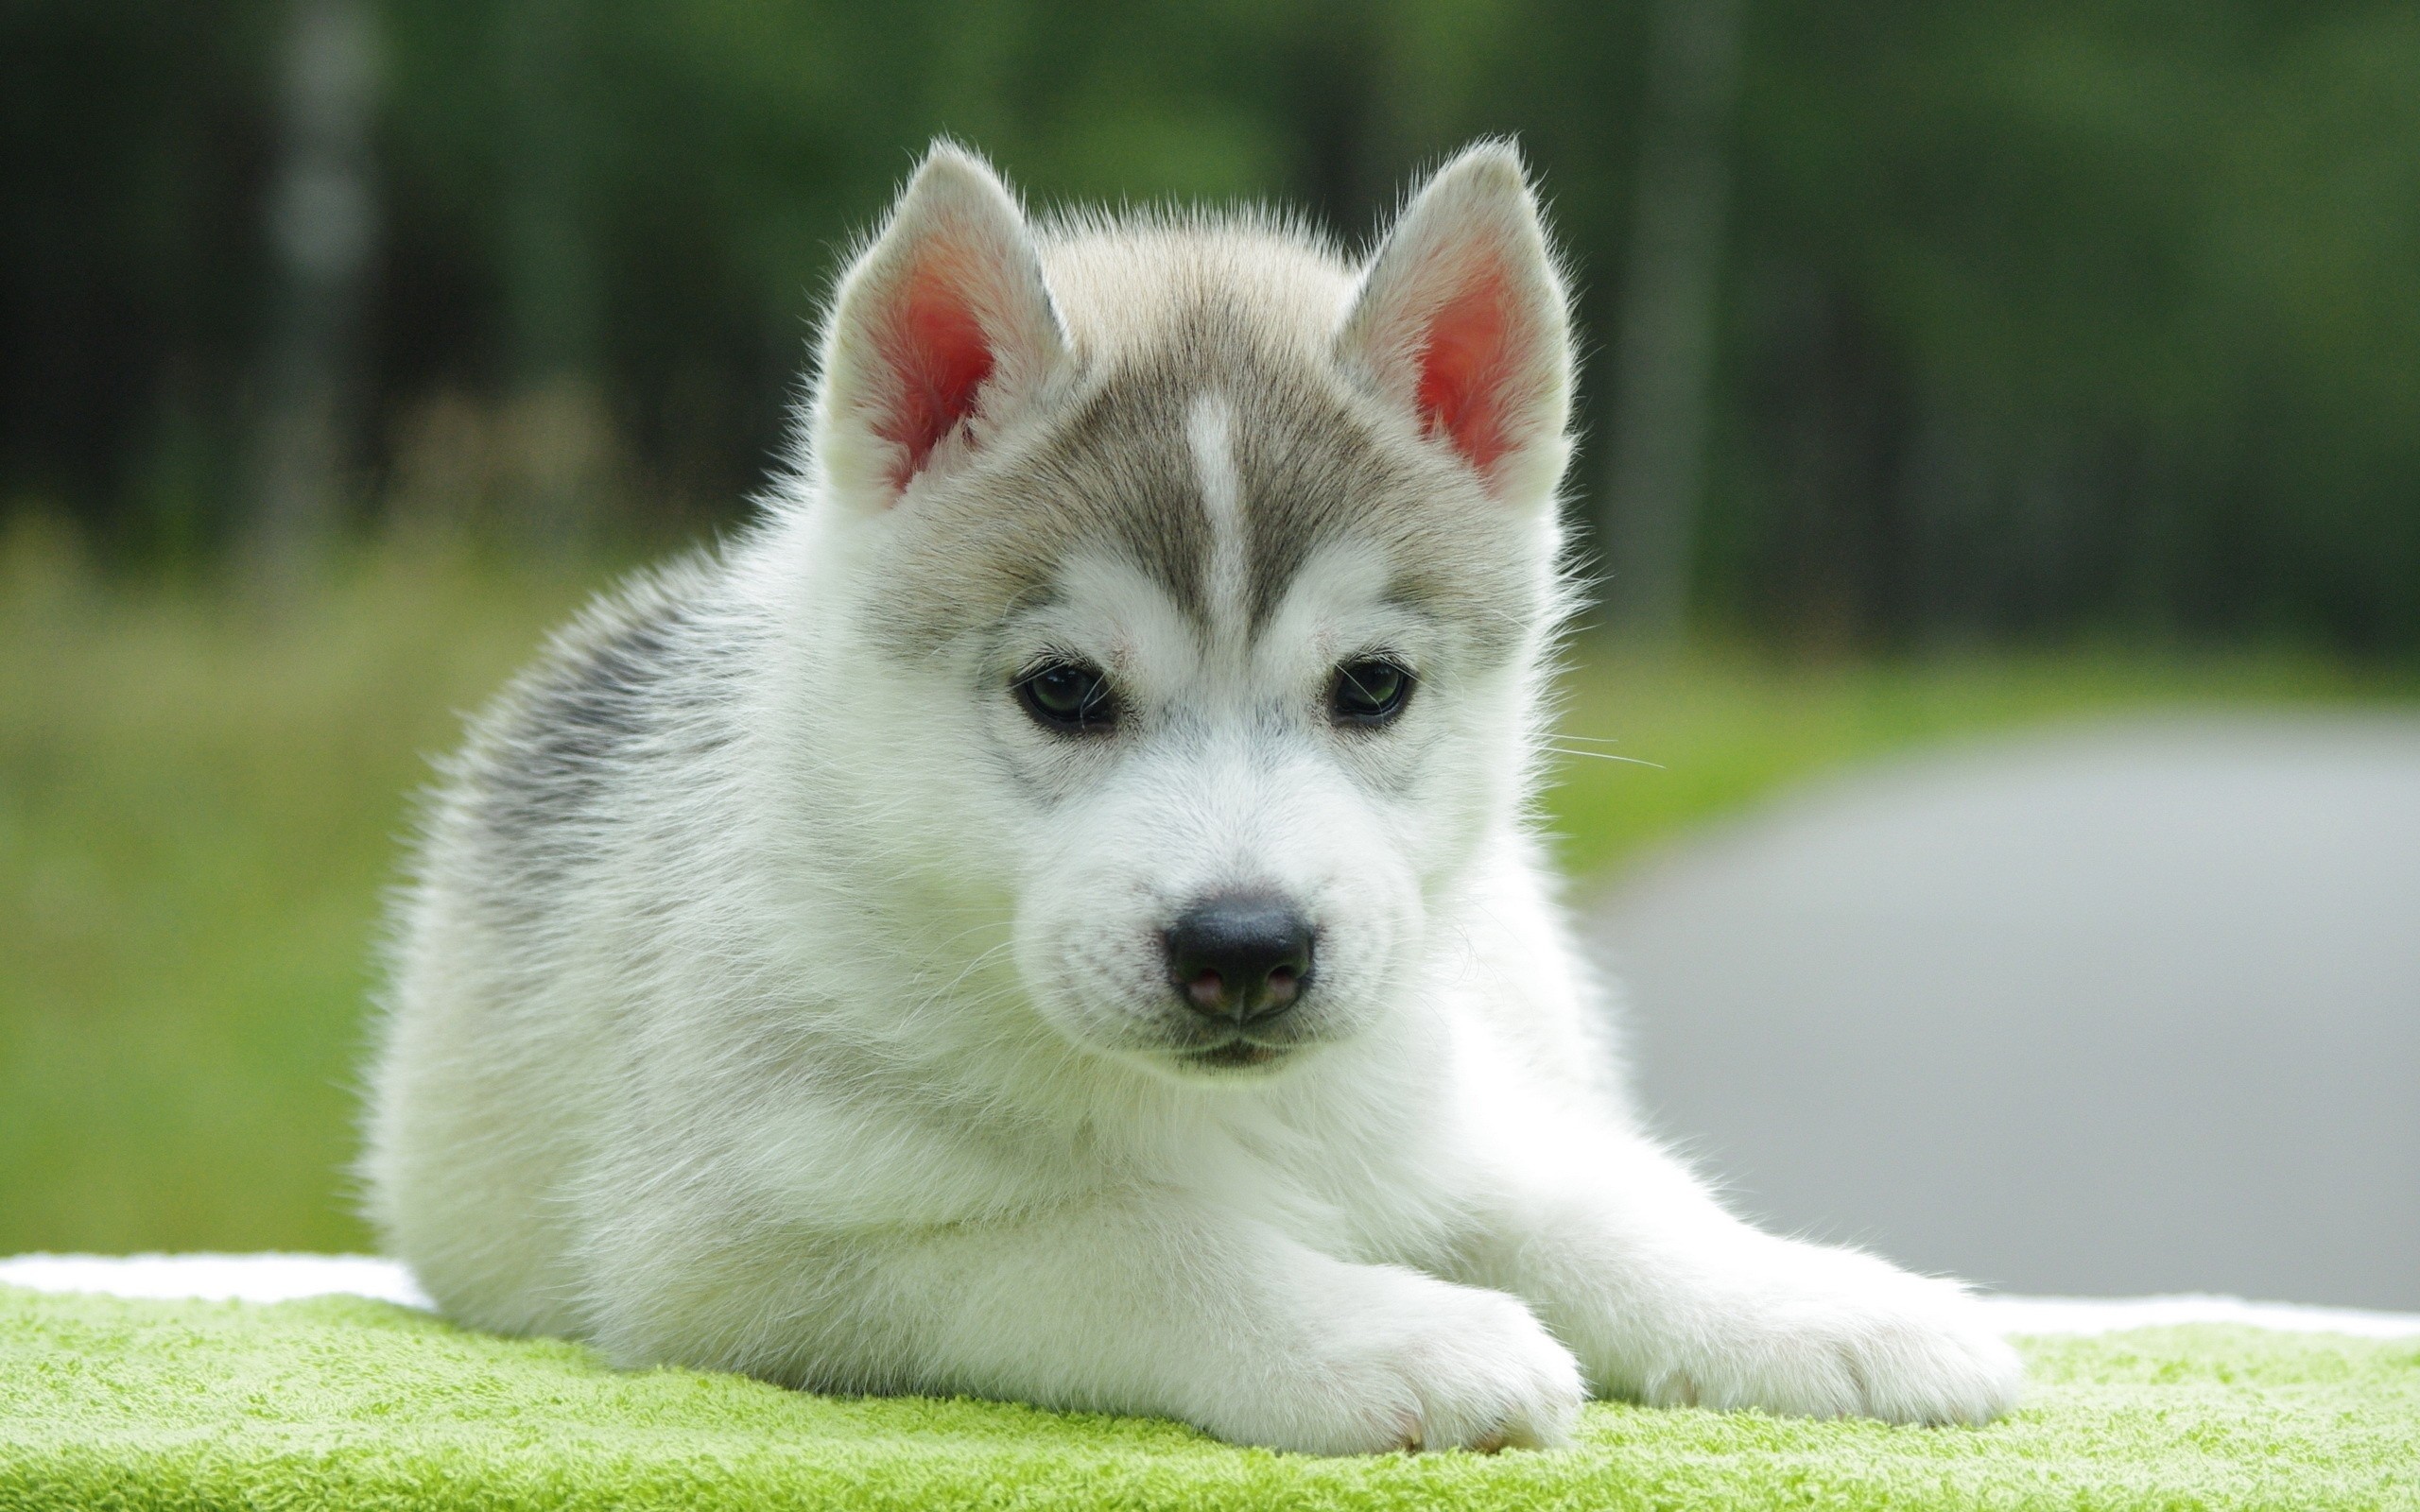 14 Cute Dogs That Can Melt Anyone's Heart- The Cutest Dog Breeds ...